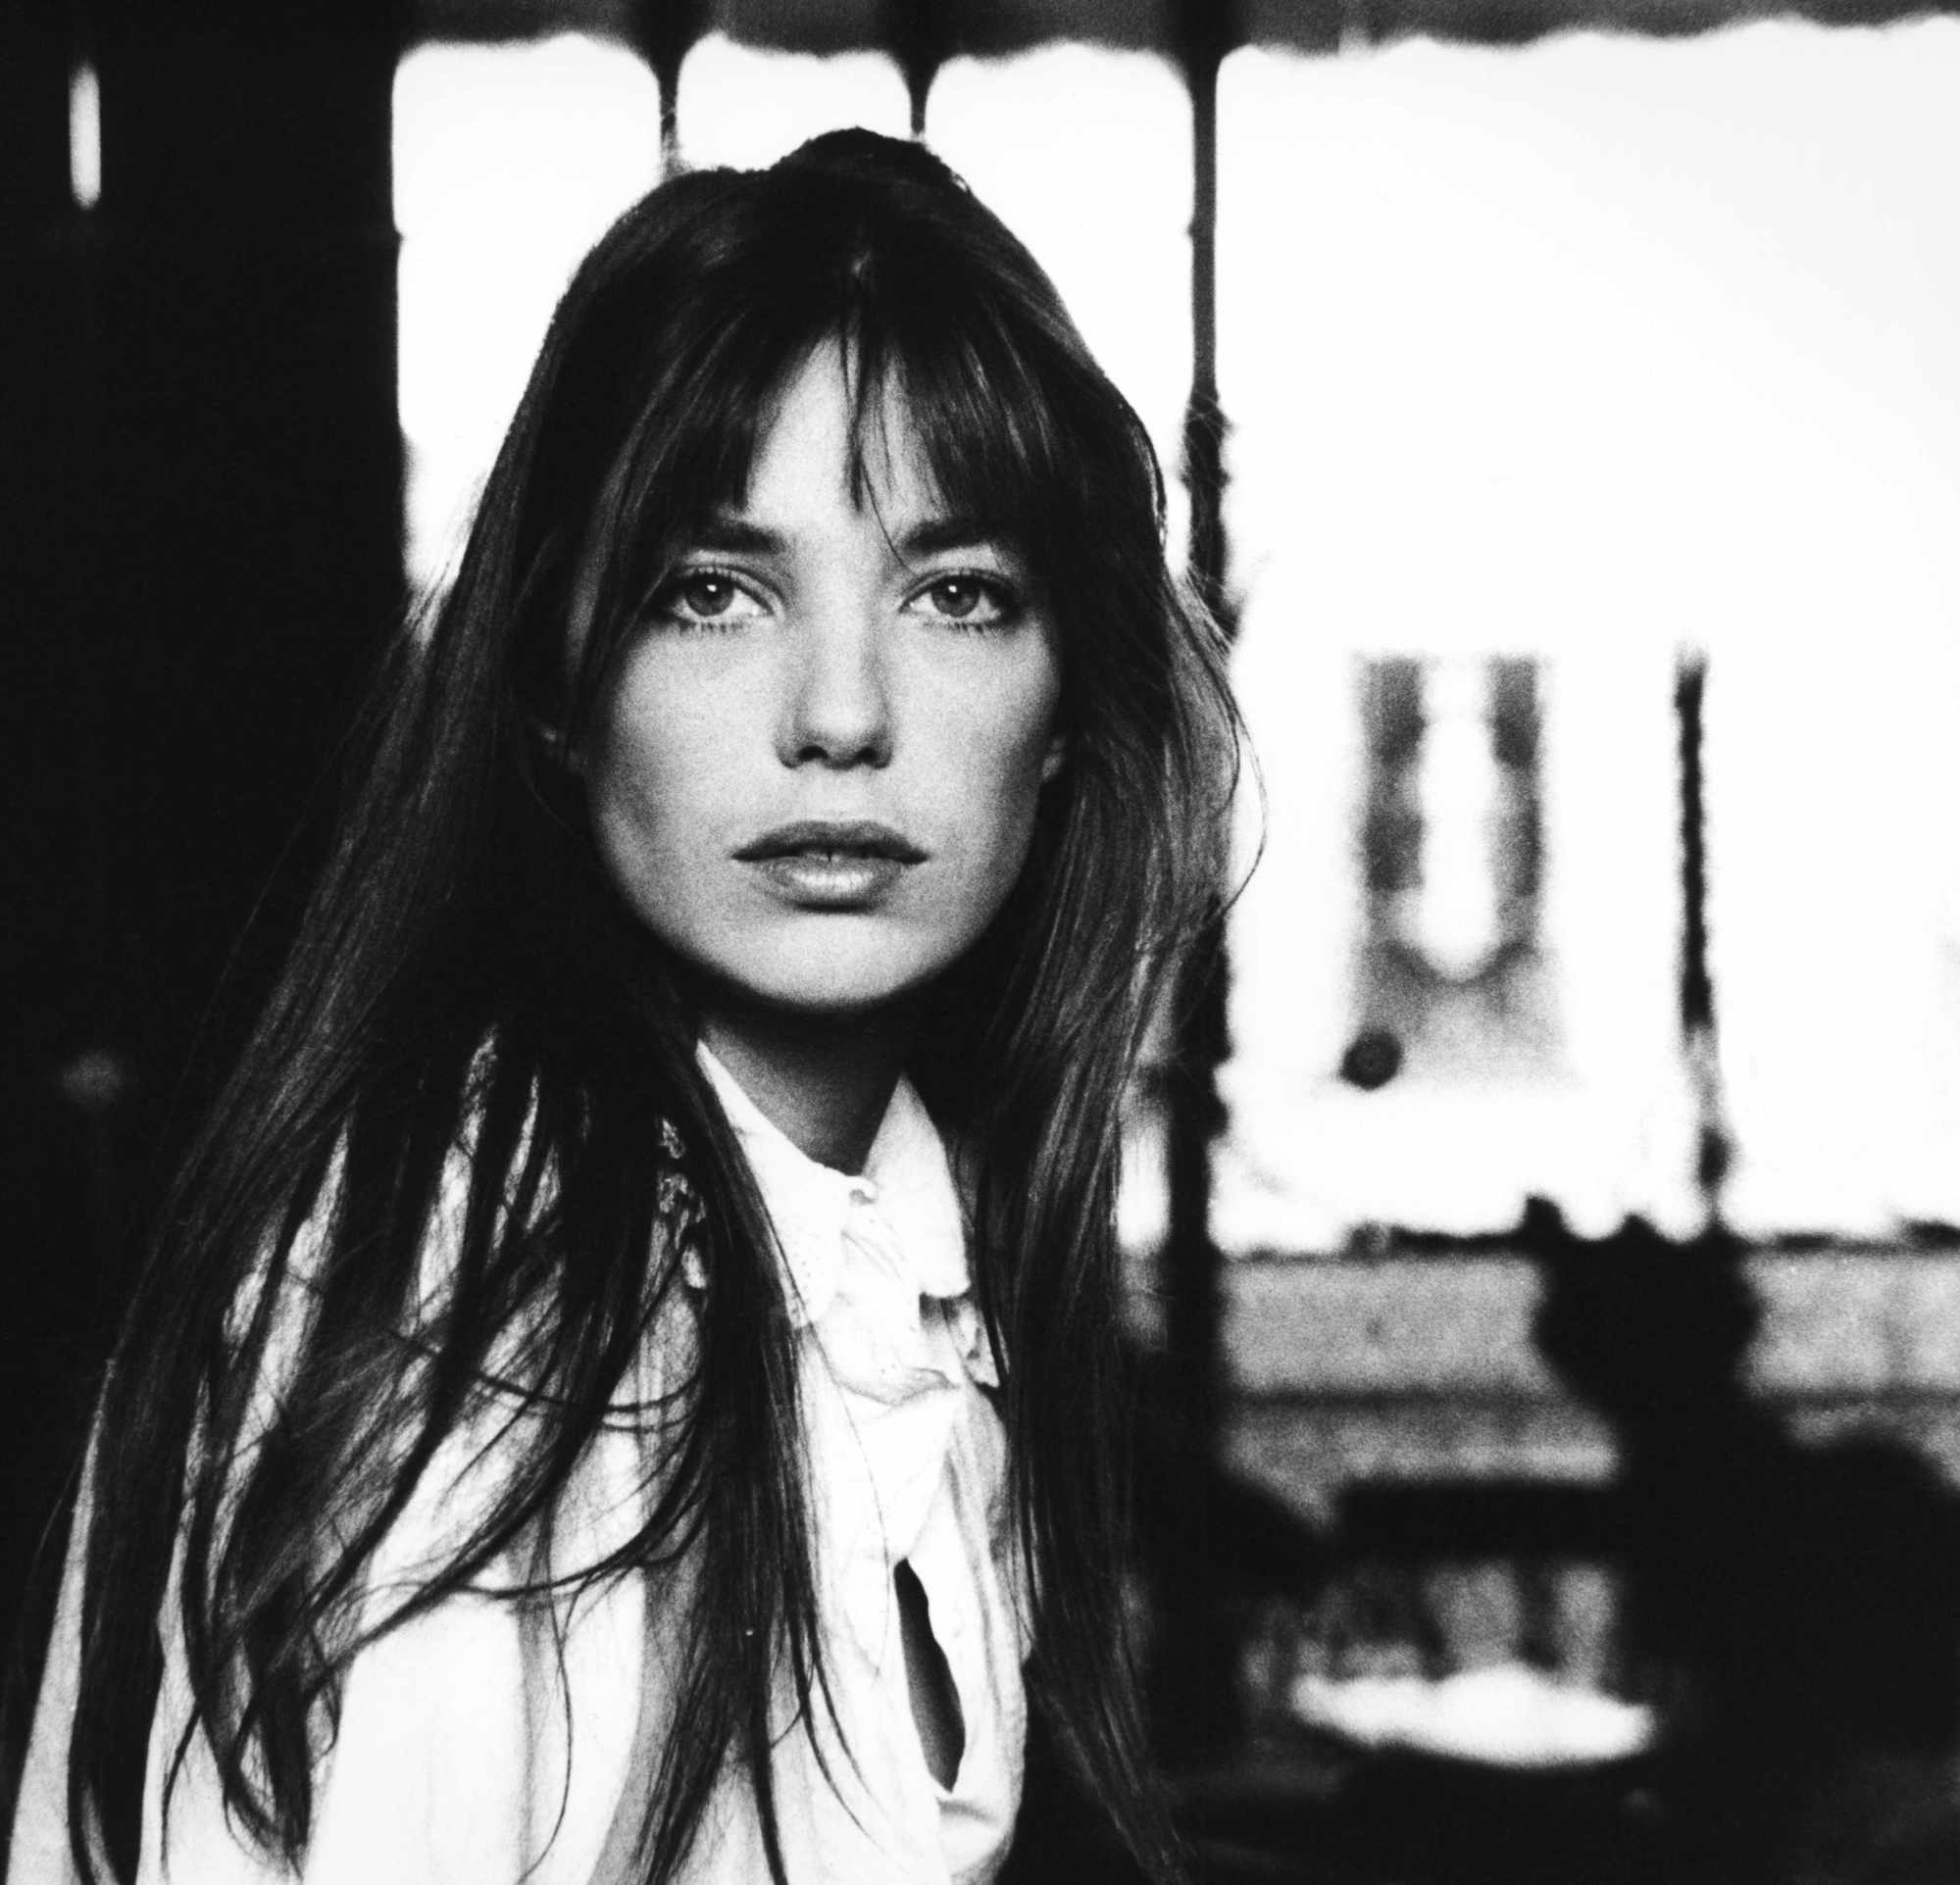 Jane Birkin: Why did Hermes name a bag after the actress?